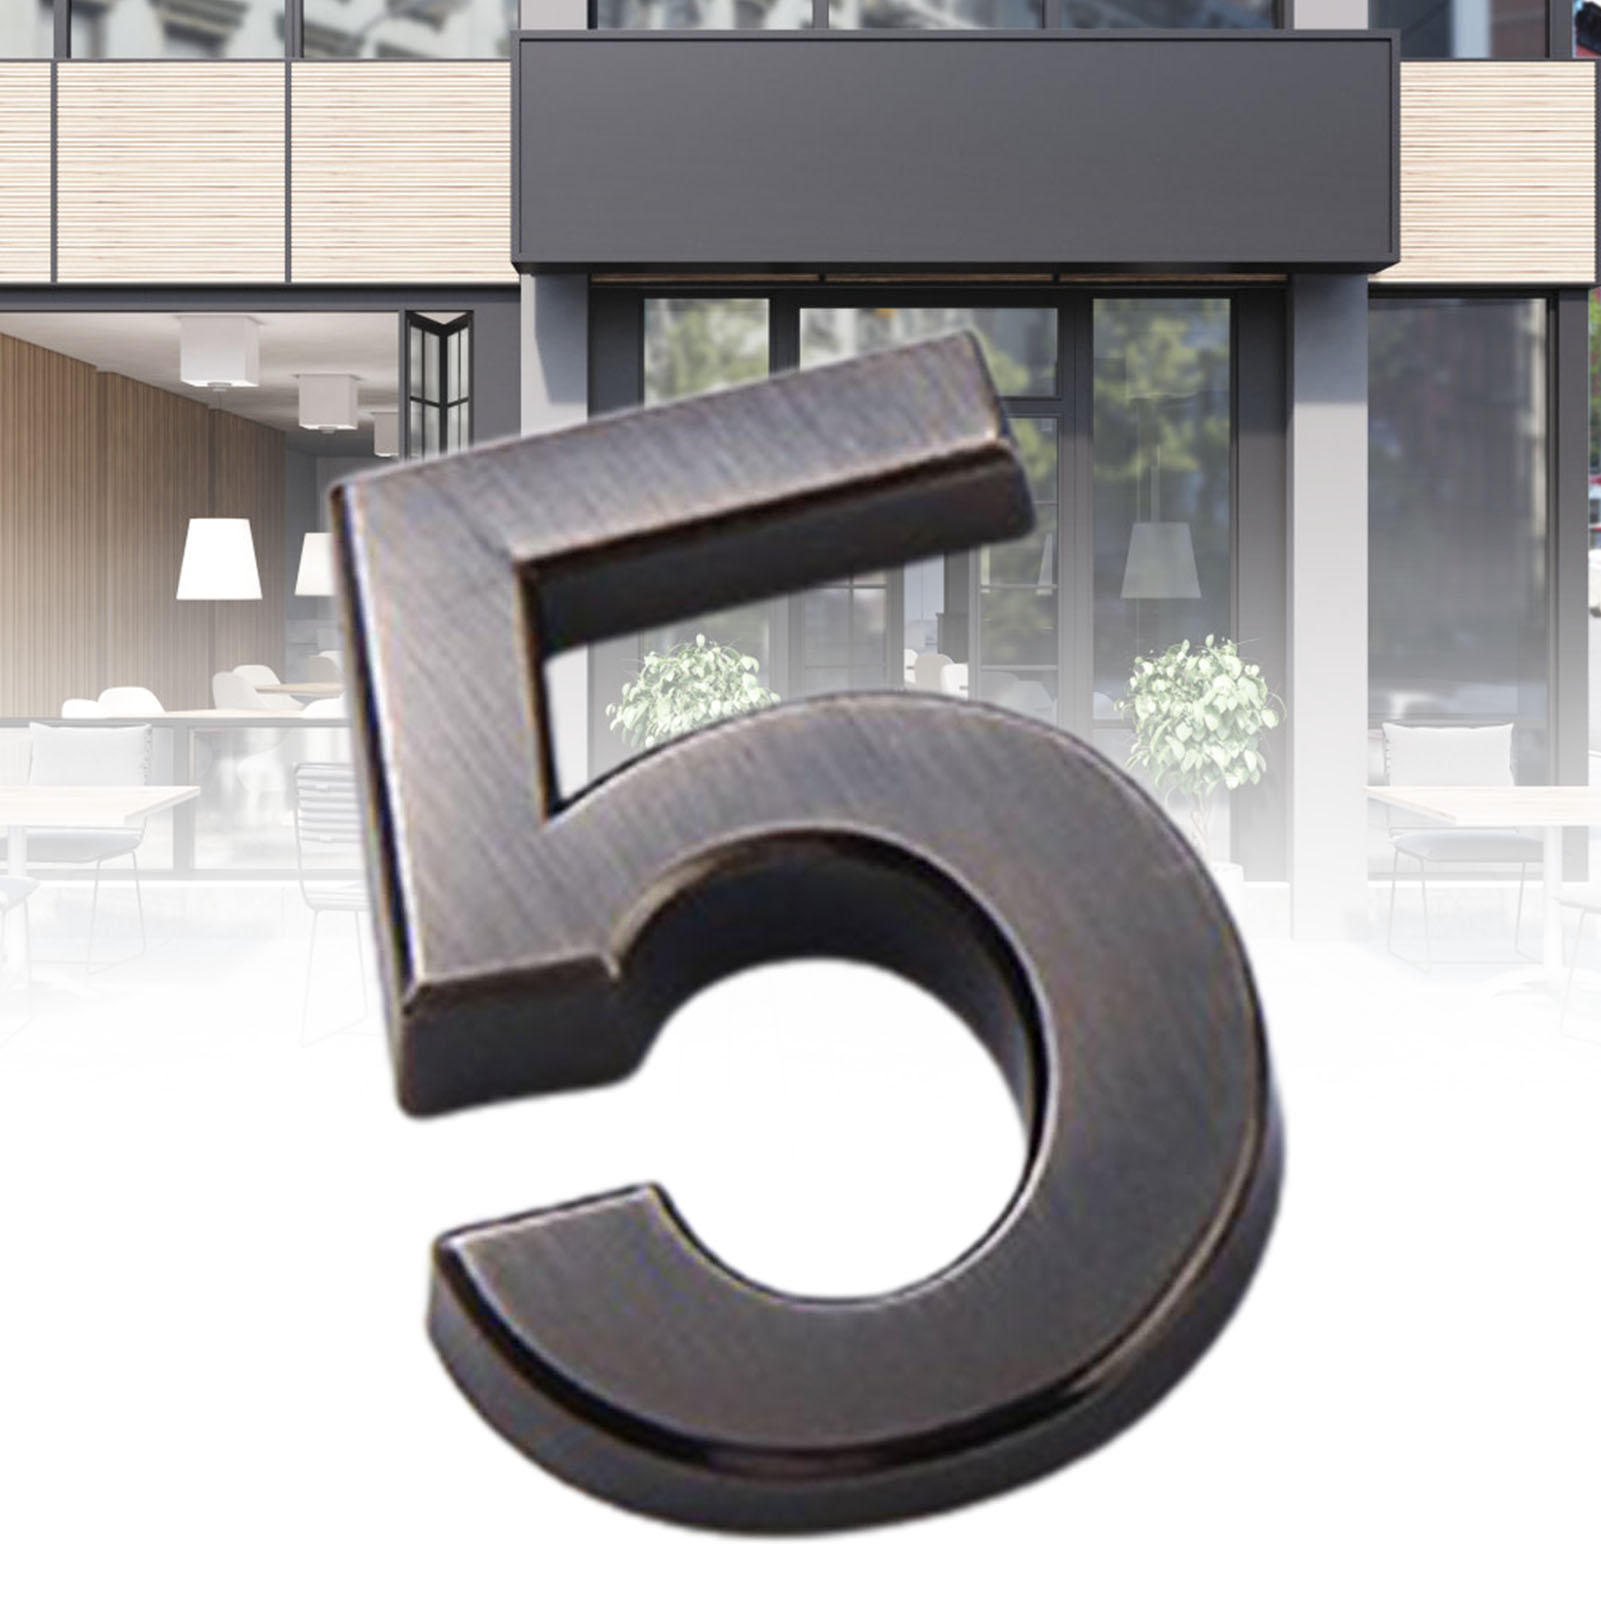 SPRING PARK Modern House Numbers Plaque Number Digits Sticker Plate Sign Numeral Door Letter - image 3 of 7